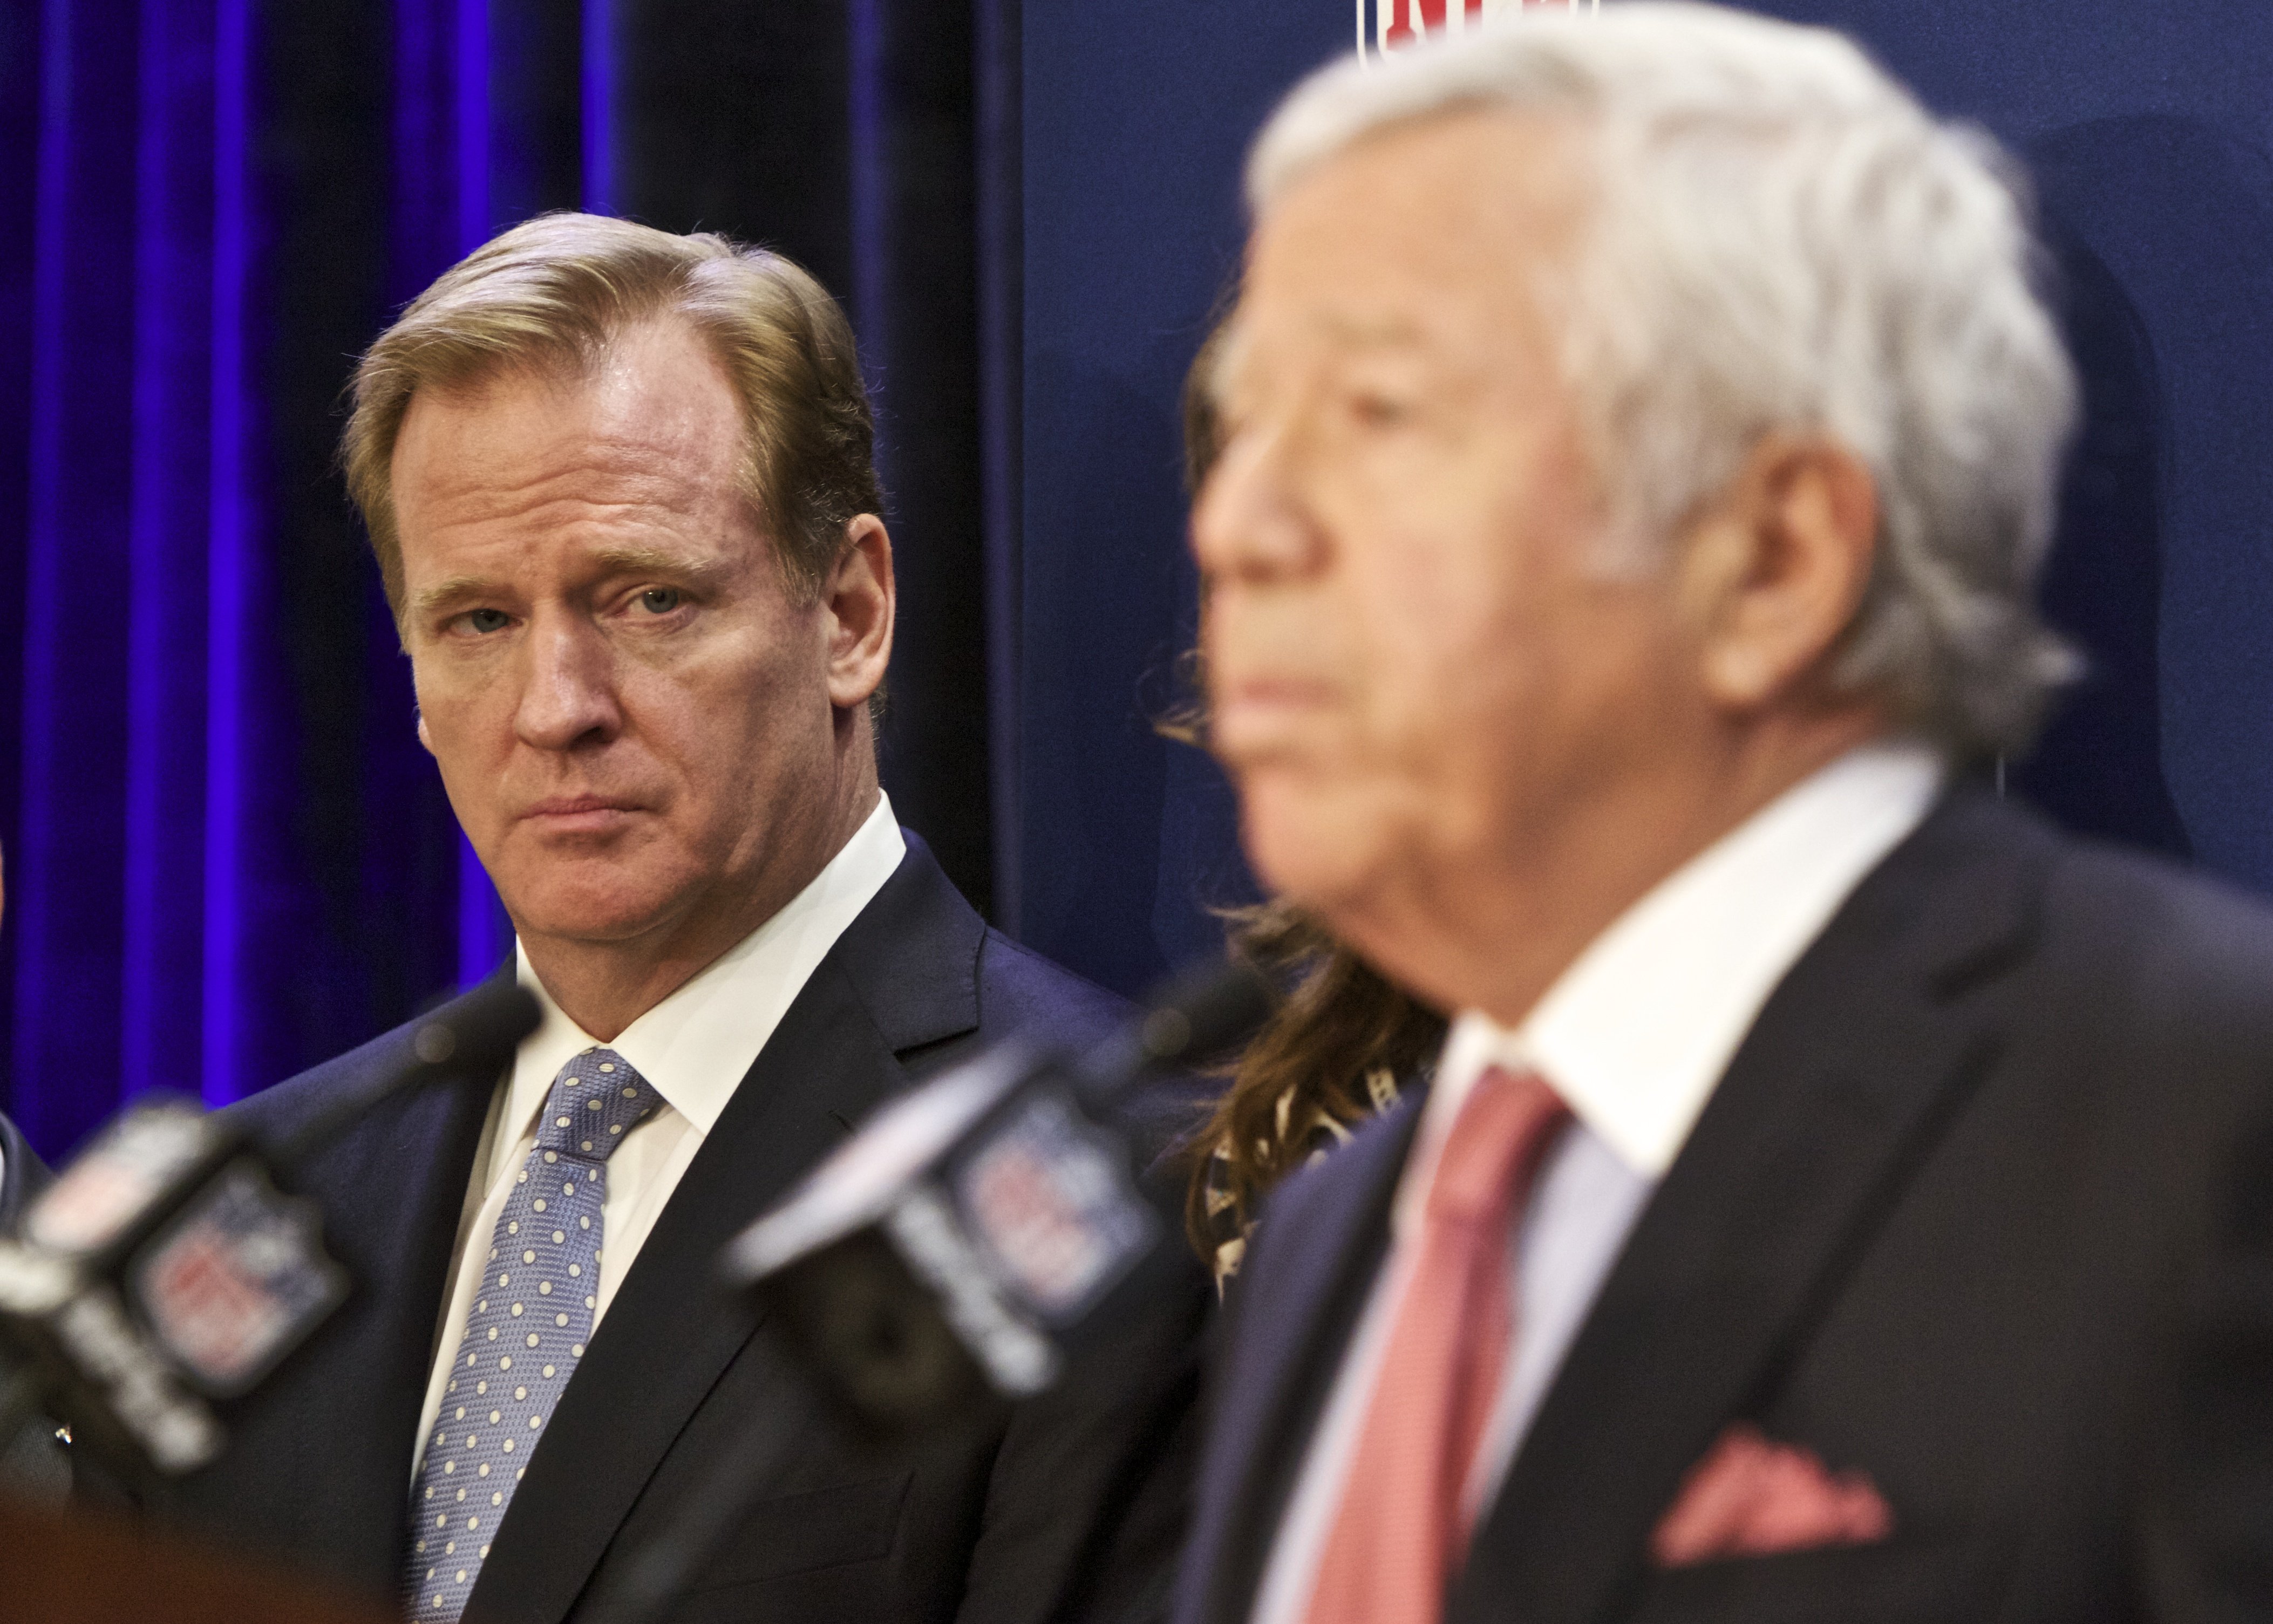 NFL commissioner Roger Goodell looks on as New England Patriots owner Robert Kraft speaks at an NFL press conference announcing new measures for the league's personal conduct policy during an owners meeting on Dec. 10, 2014, in Irving, Texas. (Brandon Wade—AP)